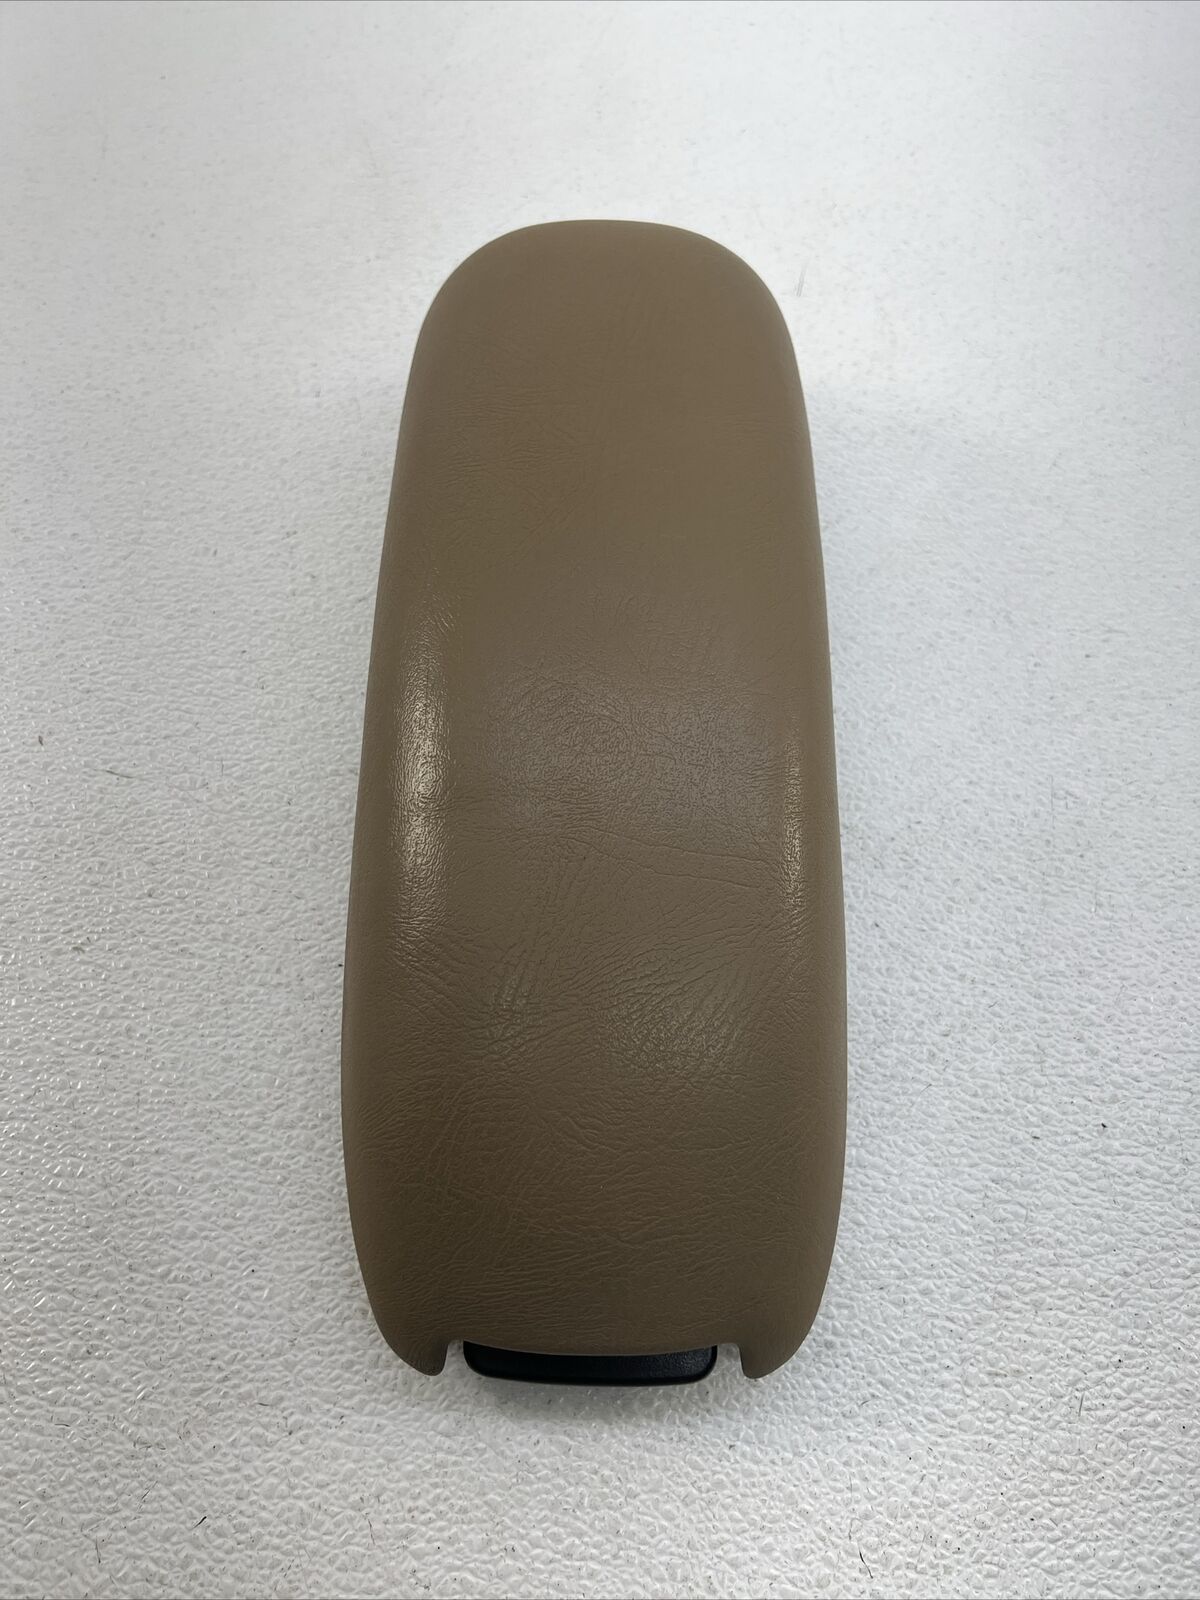 98-04 Chevy S10 Blazer GMC Jimmy Center Console Arm Rest Lid Cover Tan OEM